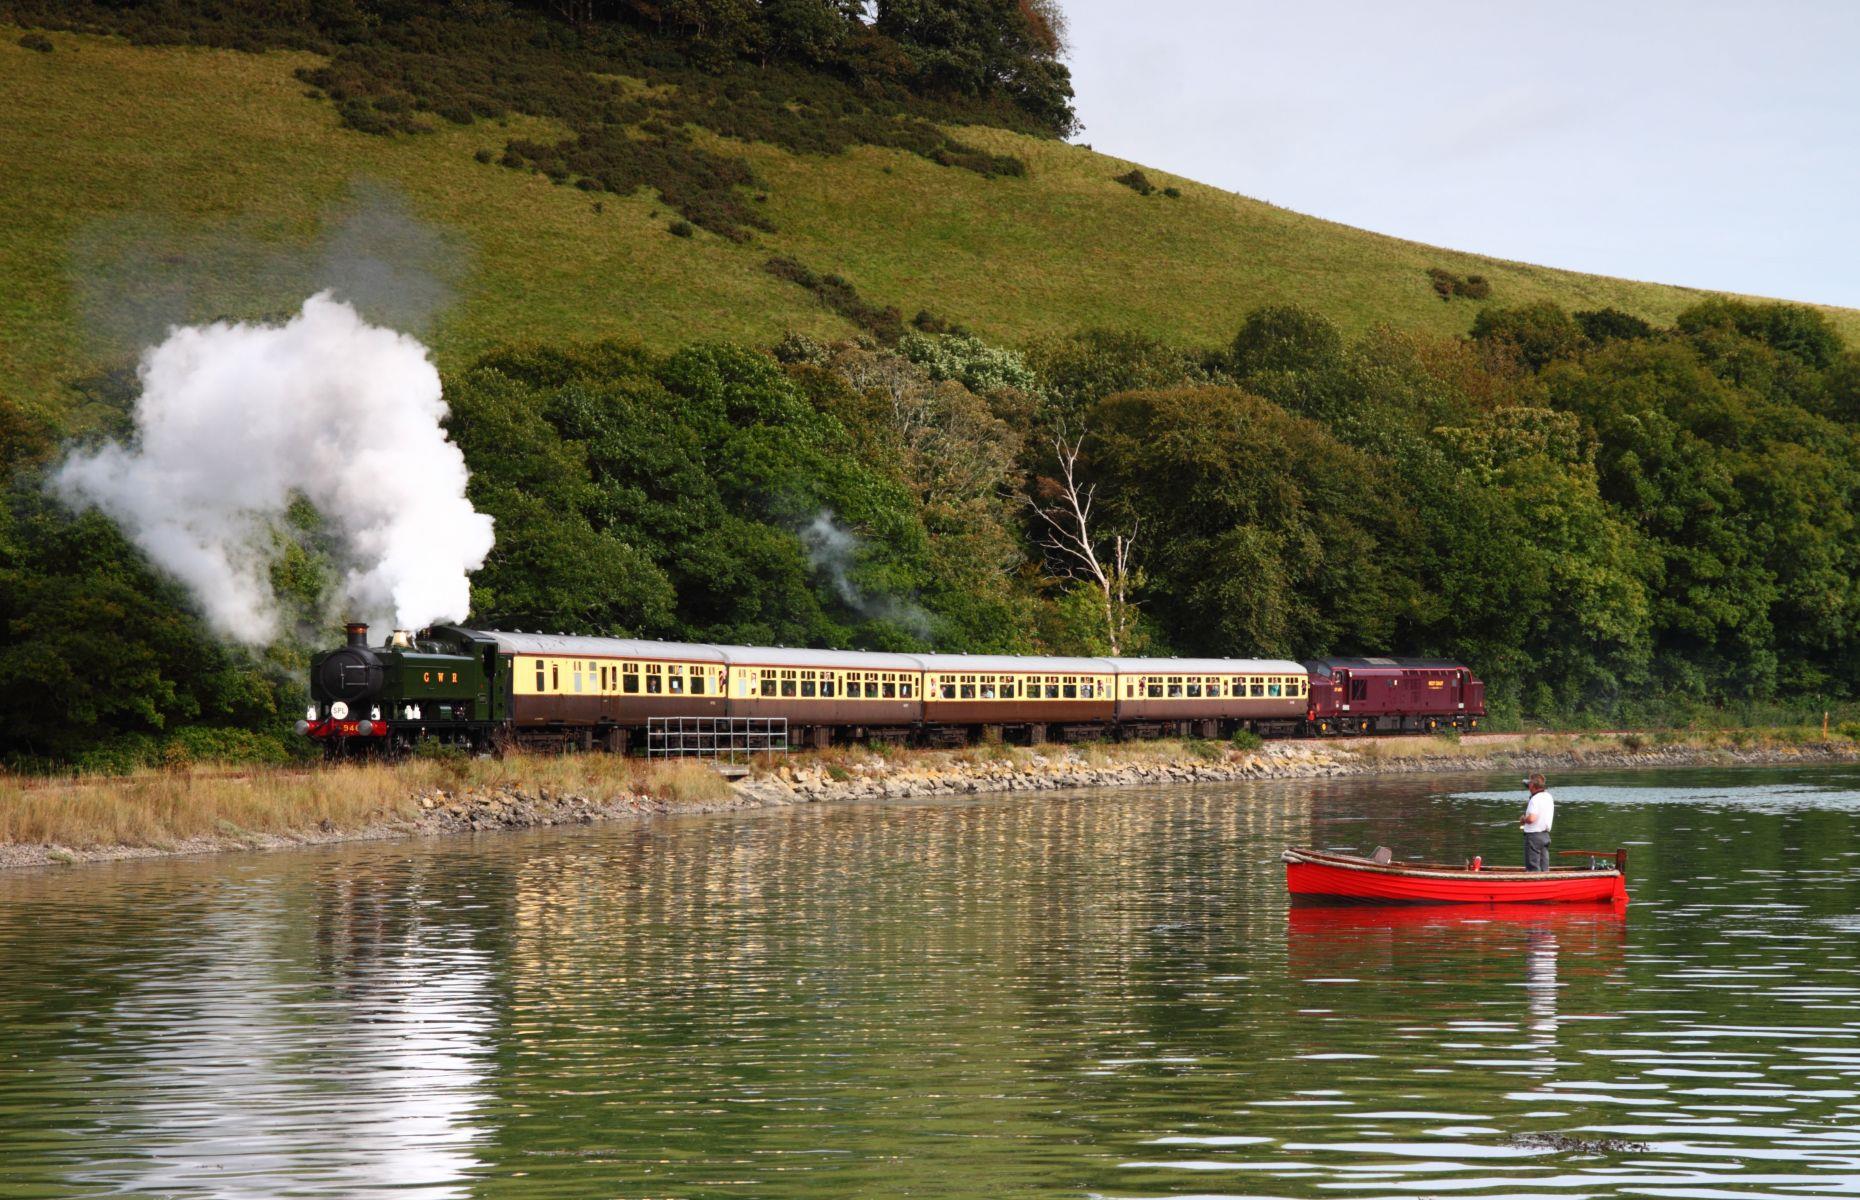 <p>Snaking through the picturesque Looe Valley in southeast Cornwall, this <a href="https://greatscenicrailways.co.uk/lines/looe-valley-line/">short but sweet train ride</a> is filled with beautiful views and incredible wildlife. Passing through the heavily wooded valley, the peaceful nine-mile (14km) journey connects the historic market town of Liskeard with the idyllic fishing port of Looe, known for its pretty sandy beaches. Trailing past the estuary as it nears the East Looe River, little egrets and grey herons can be seen wading in the waters, making it a bird watcher’s paradise. </p>